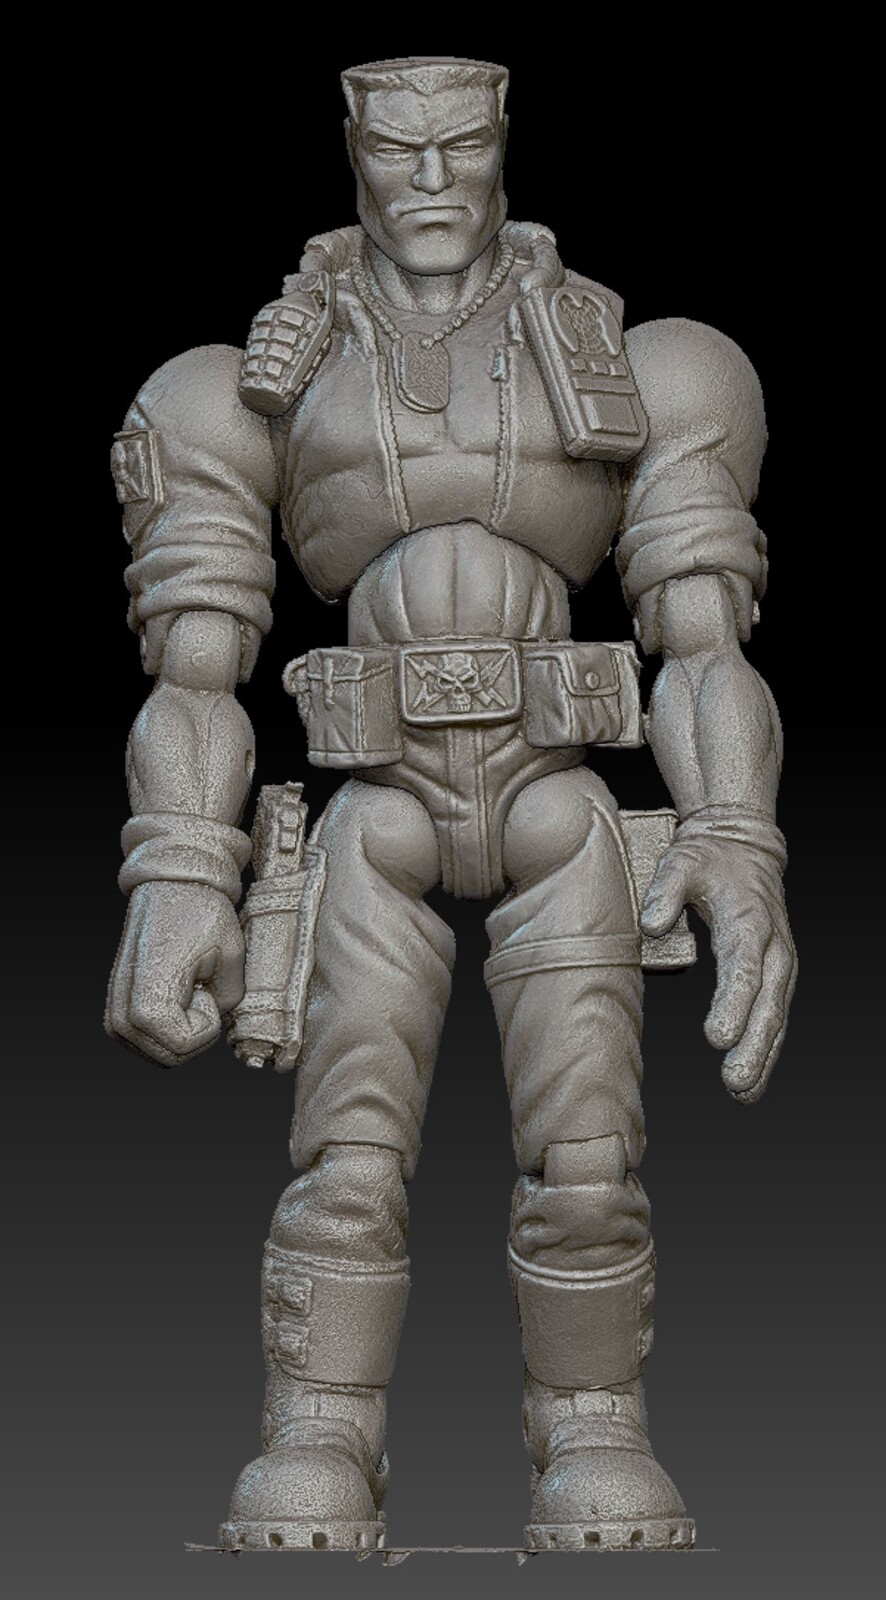 Raw scan in Zbrush before any cleanup